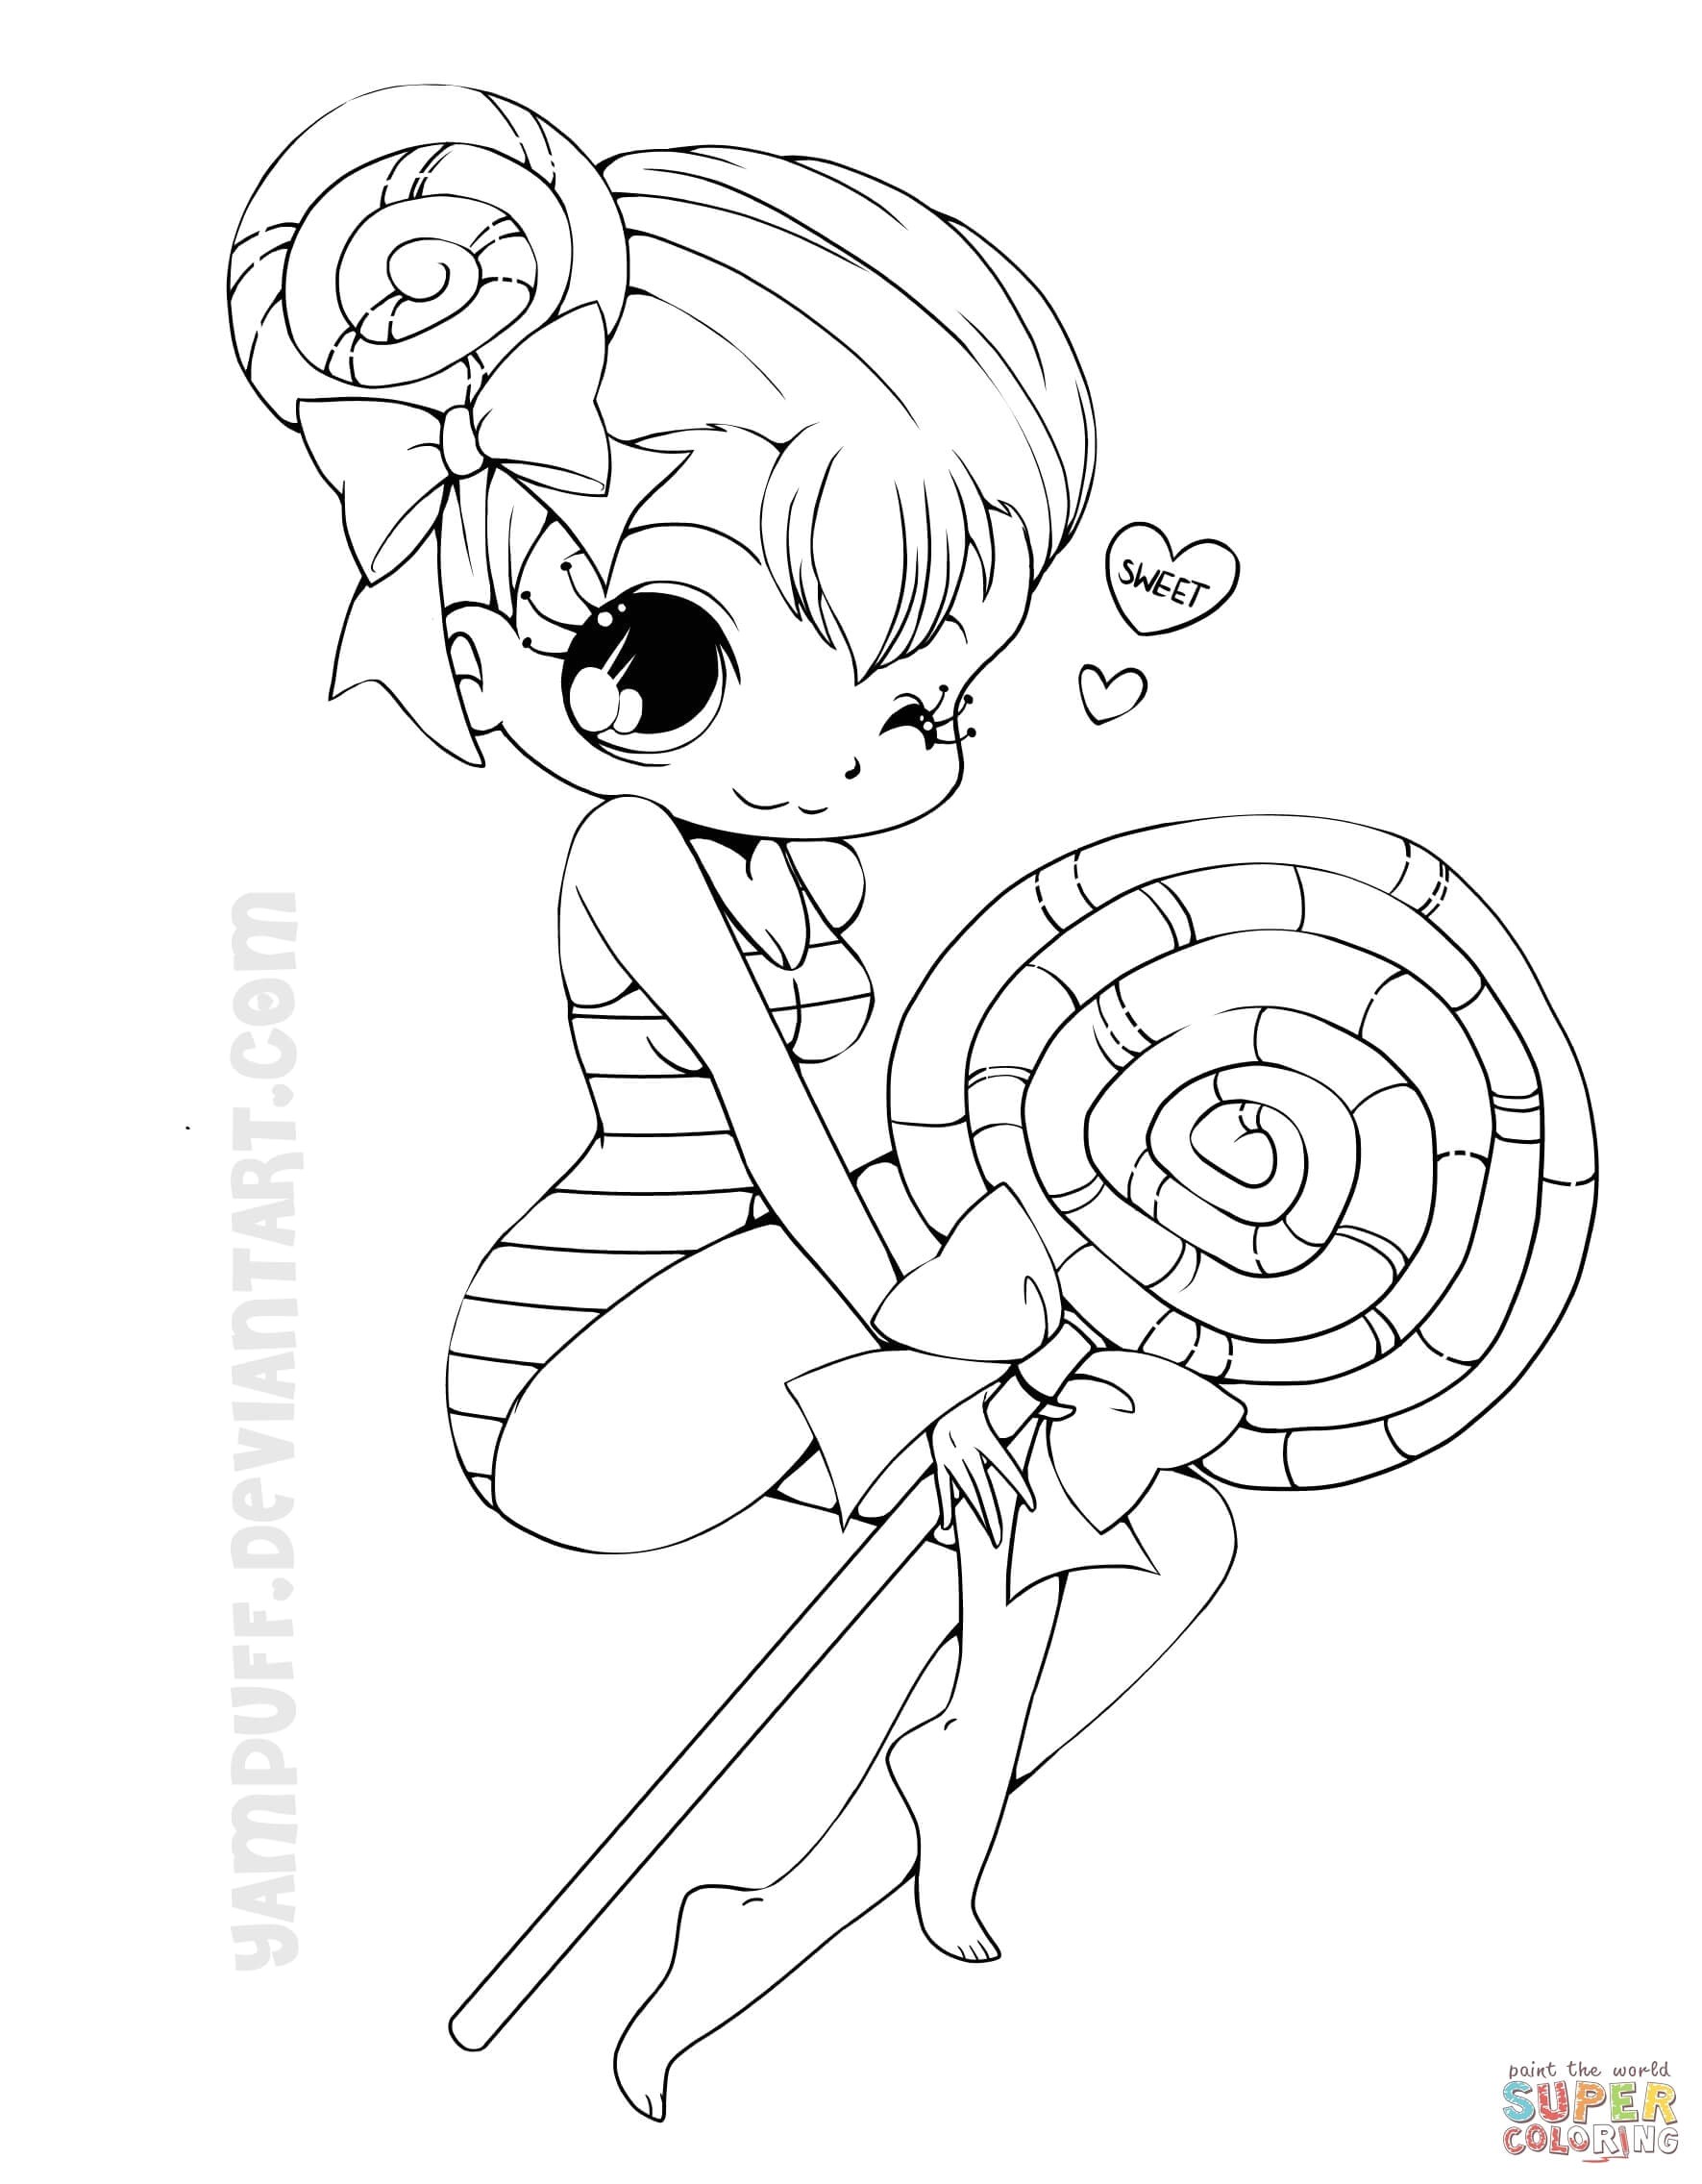 Printable Anime Coloring Pages Luxury Cute Anime Chibi Girl Coloring Pages